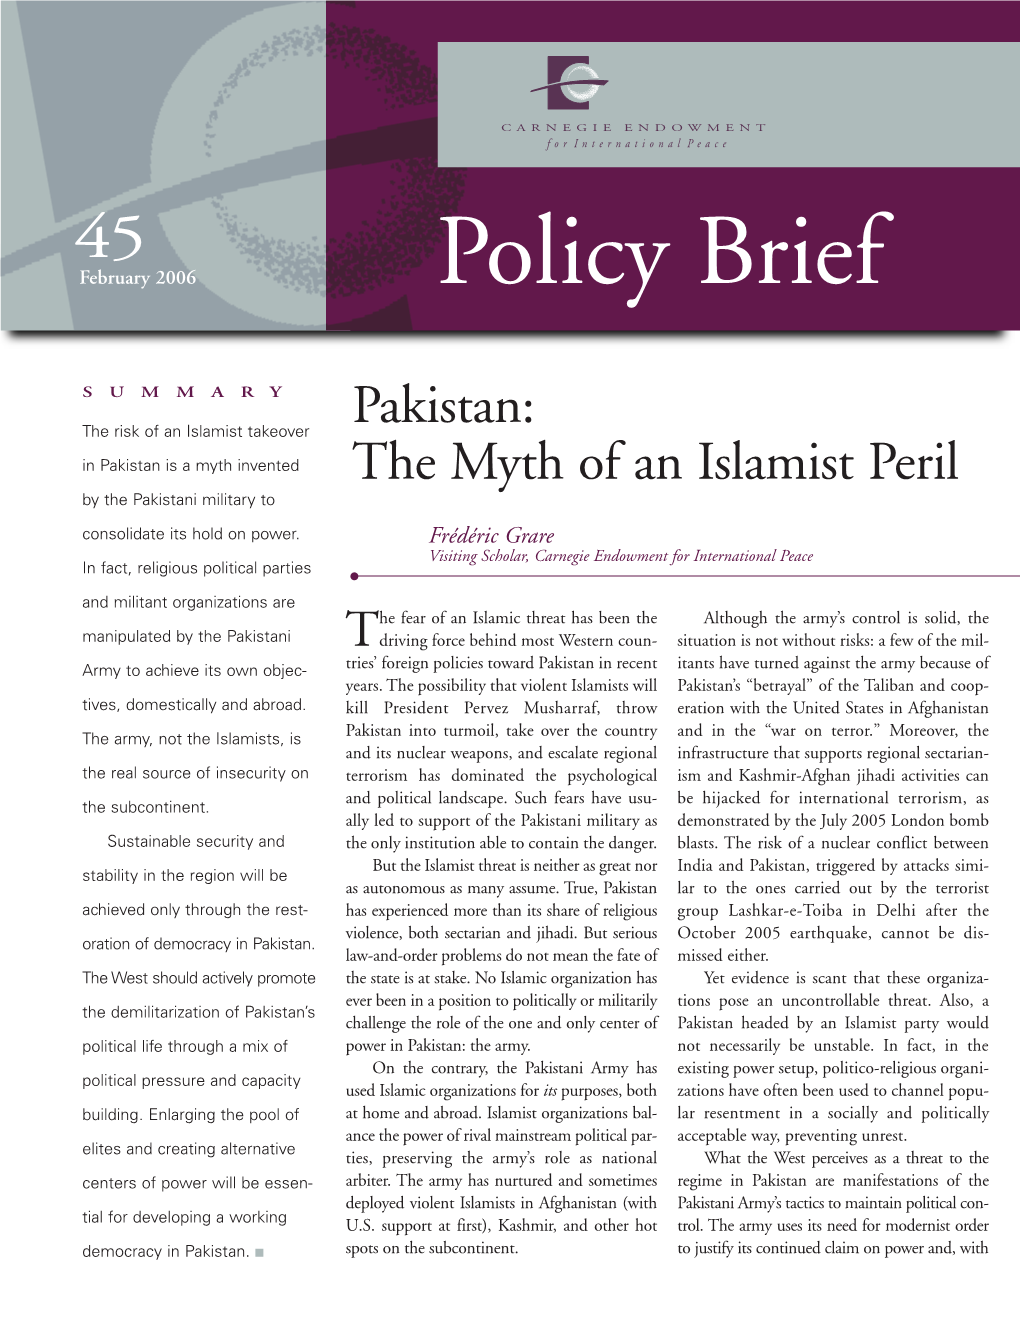 Pakistan: in Pakistan Is a Myth Invented the Myth of an Islamist Peril by the Pakistani Military to Consolidate Its Hold on Power